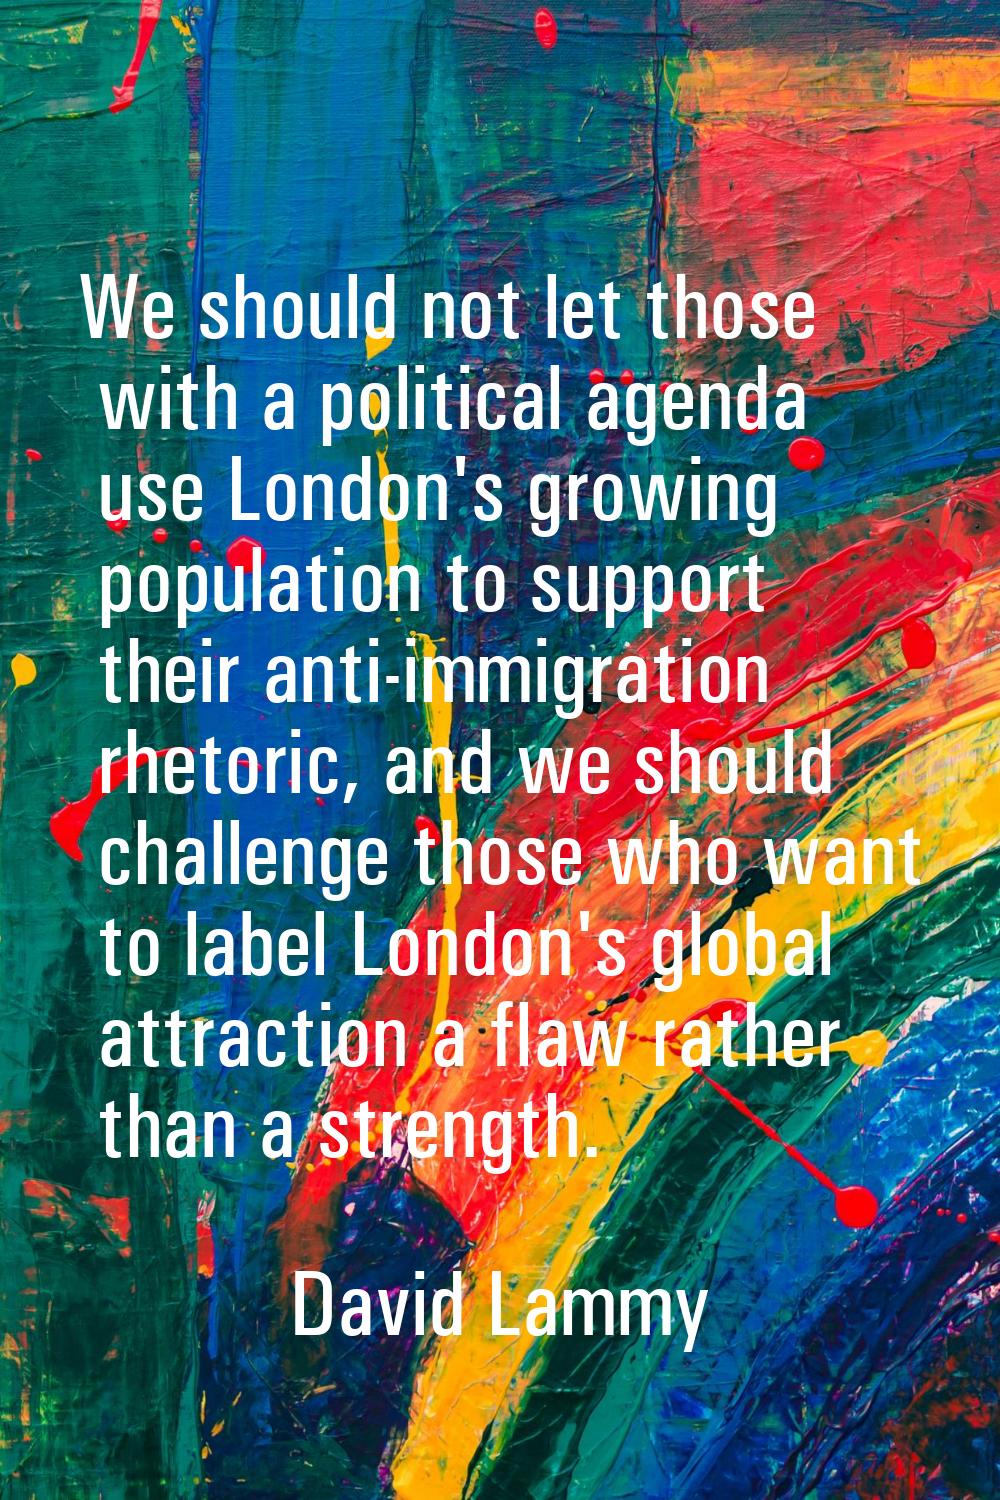 We should not let those with a political agenda use London's growing population to support their an